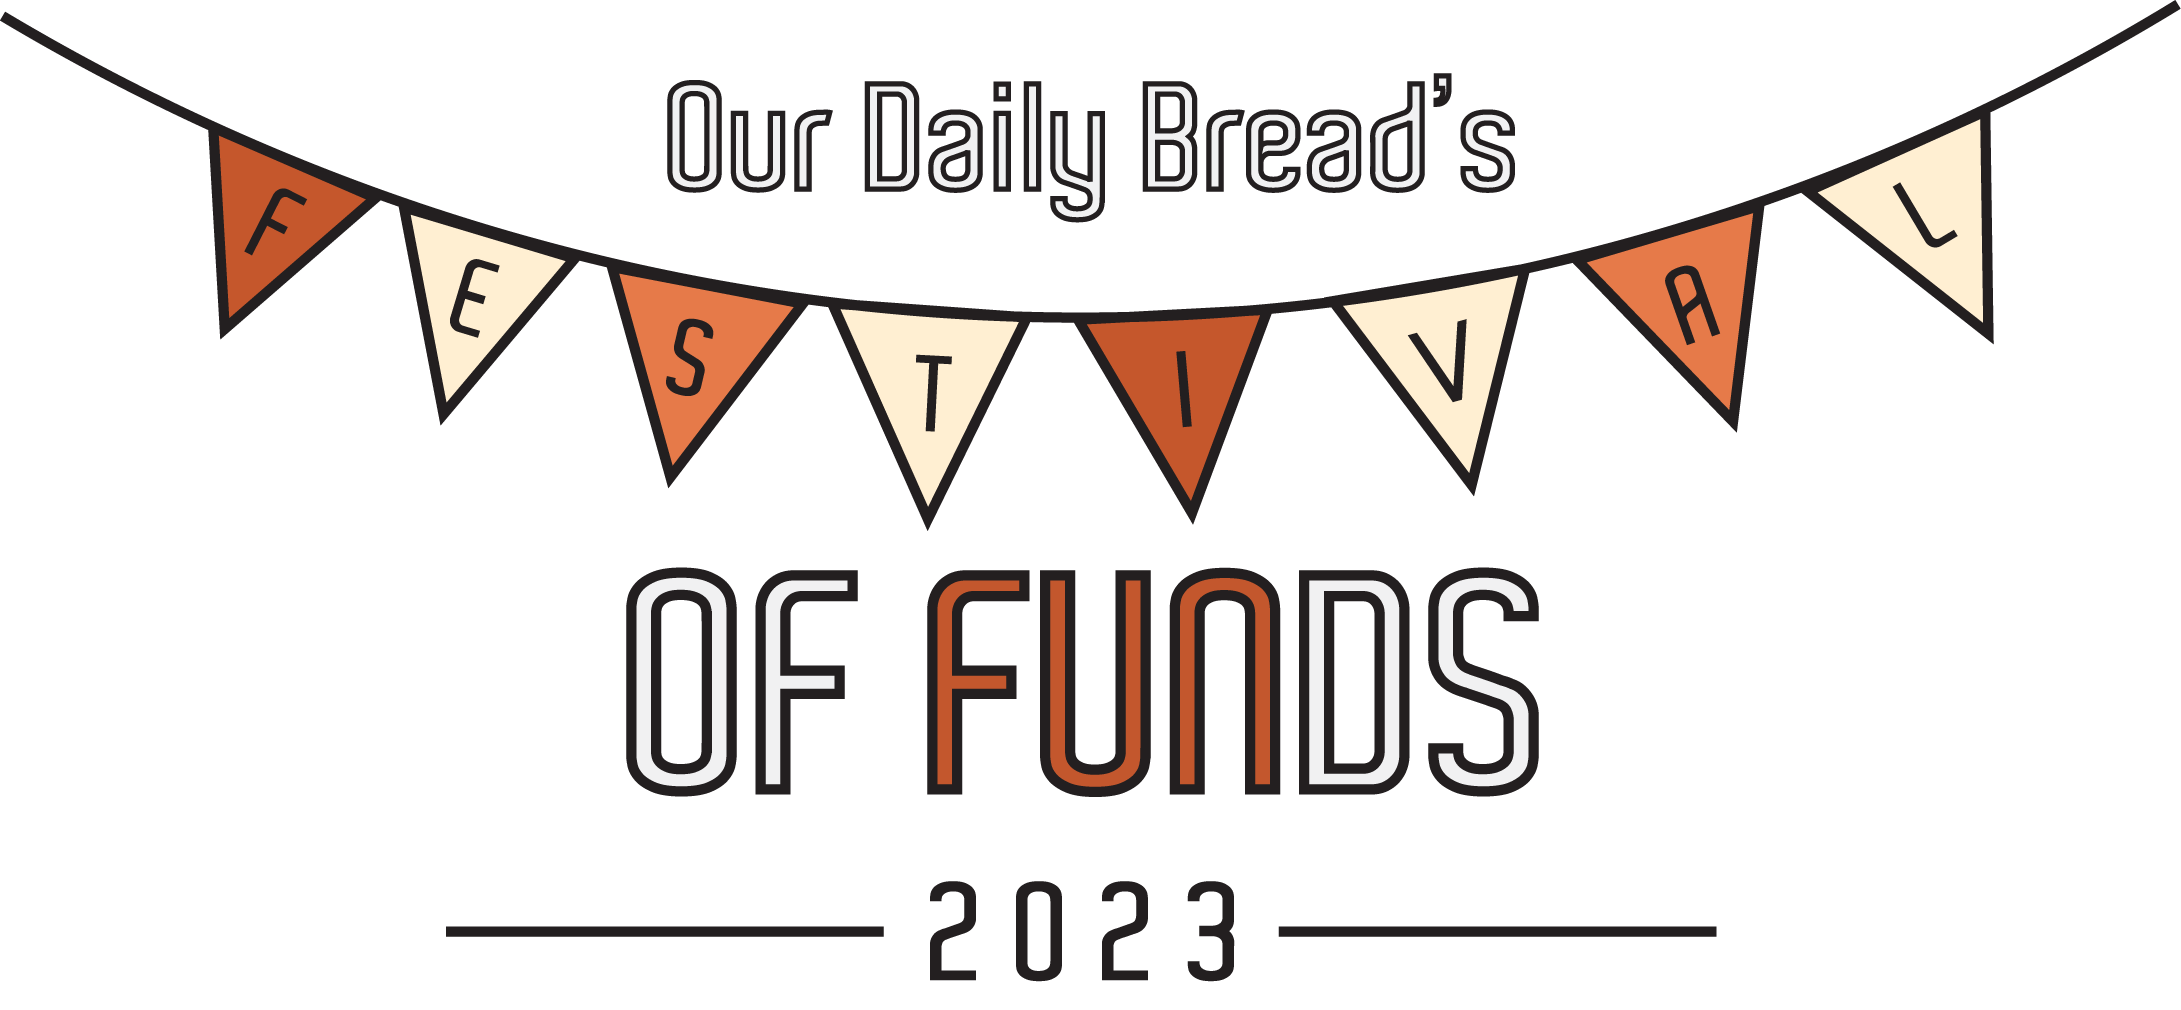 a banner that reads our daliy bread's festival of funds 2023